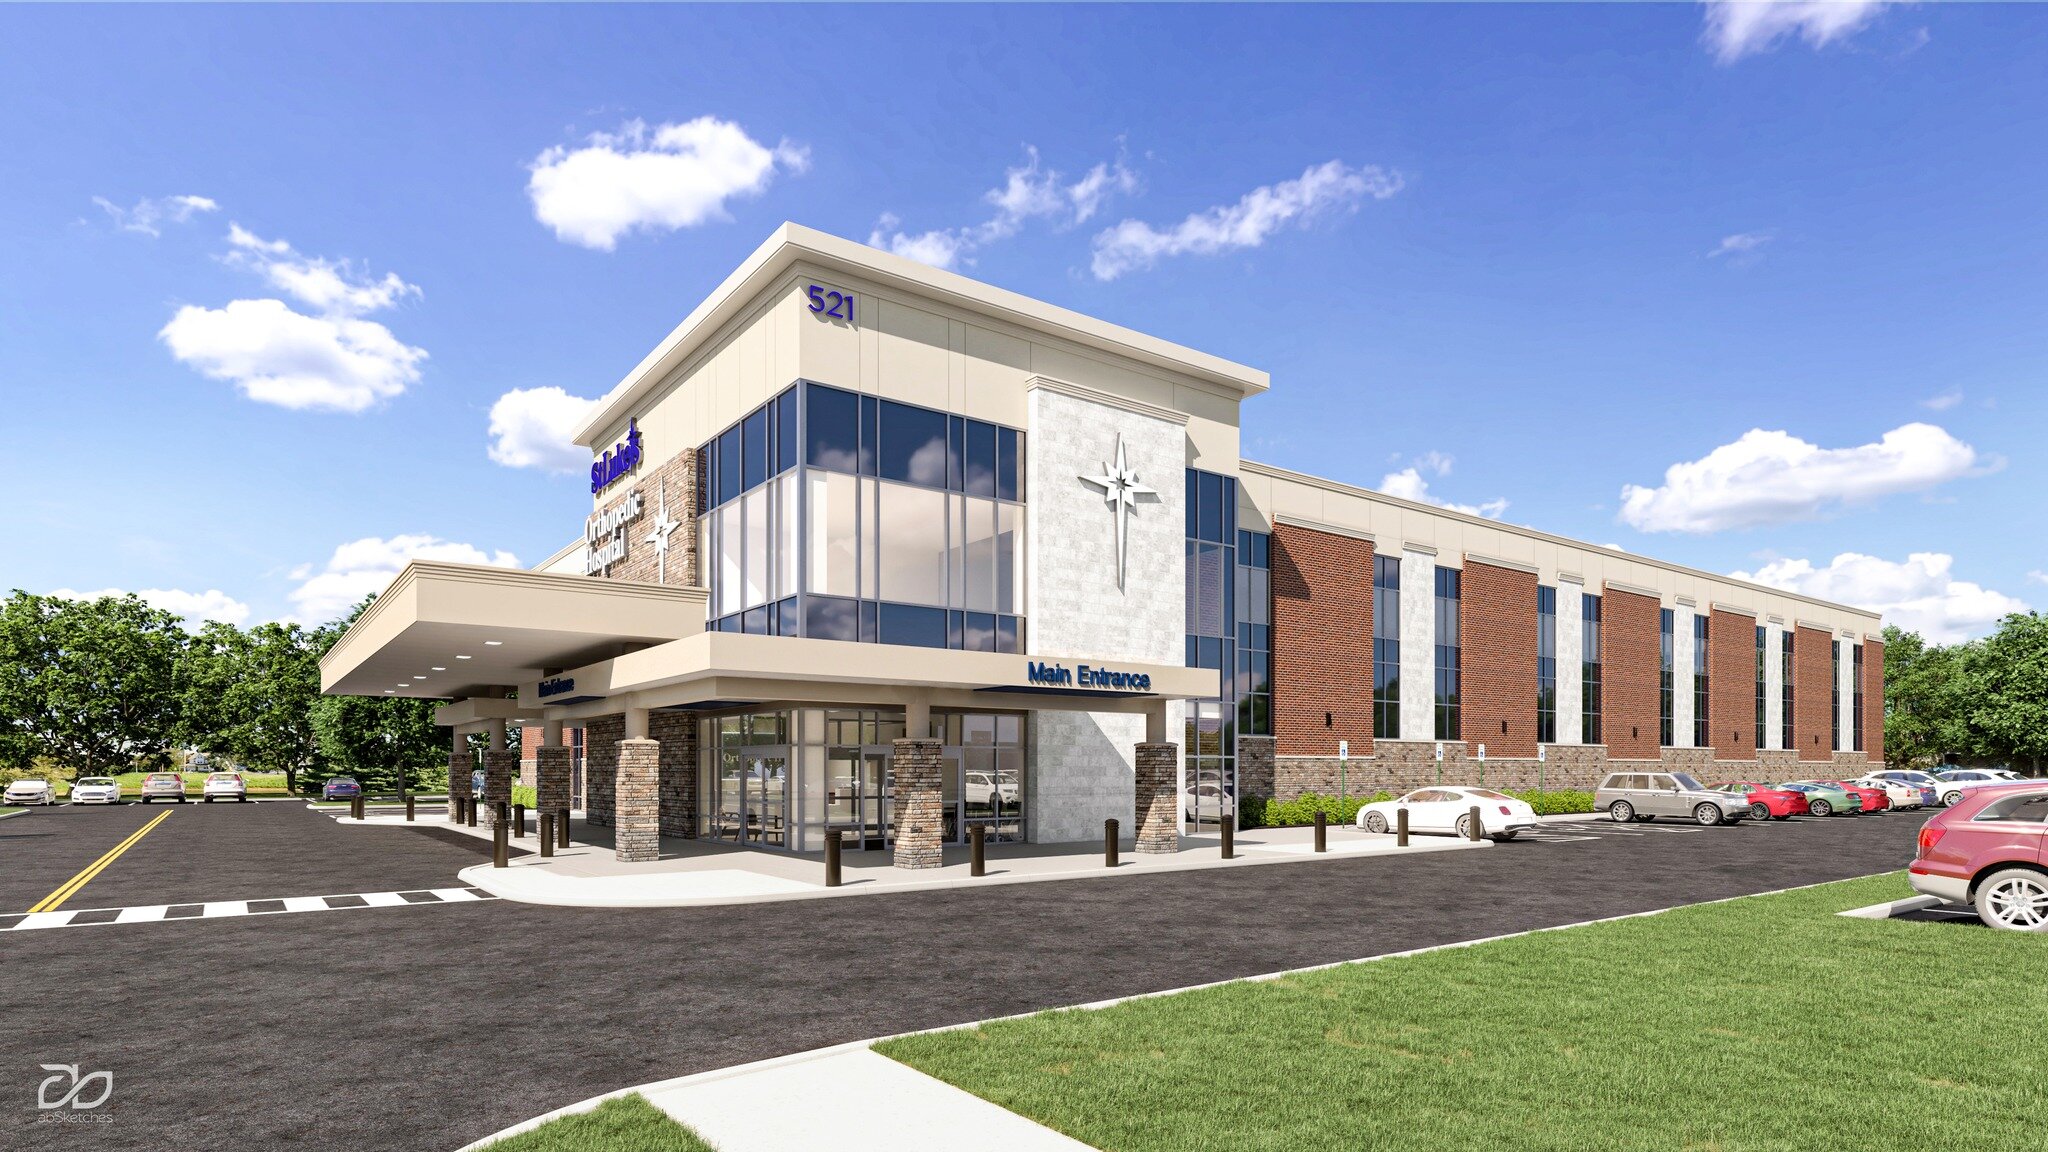 We had the pleasure of working with our partners at @mksdarchitects to visualize their stunning design for @mystlukes. (SLUHN) is pleased to introduce the area&rsquo;s newest specialty hospital for orthopedic surgery, where expert teams will perform 